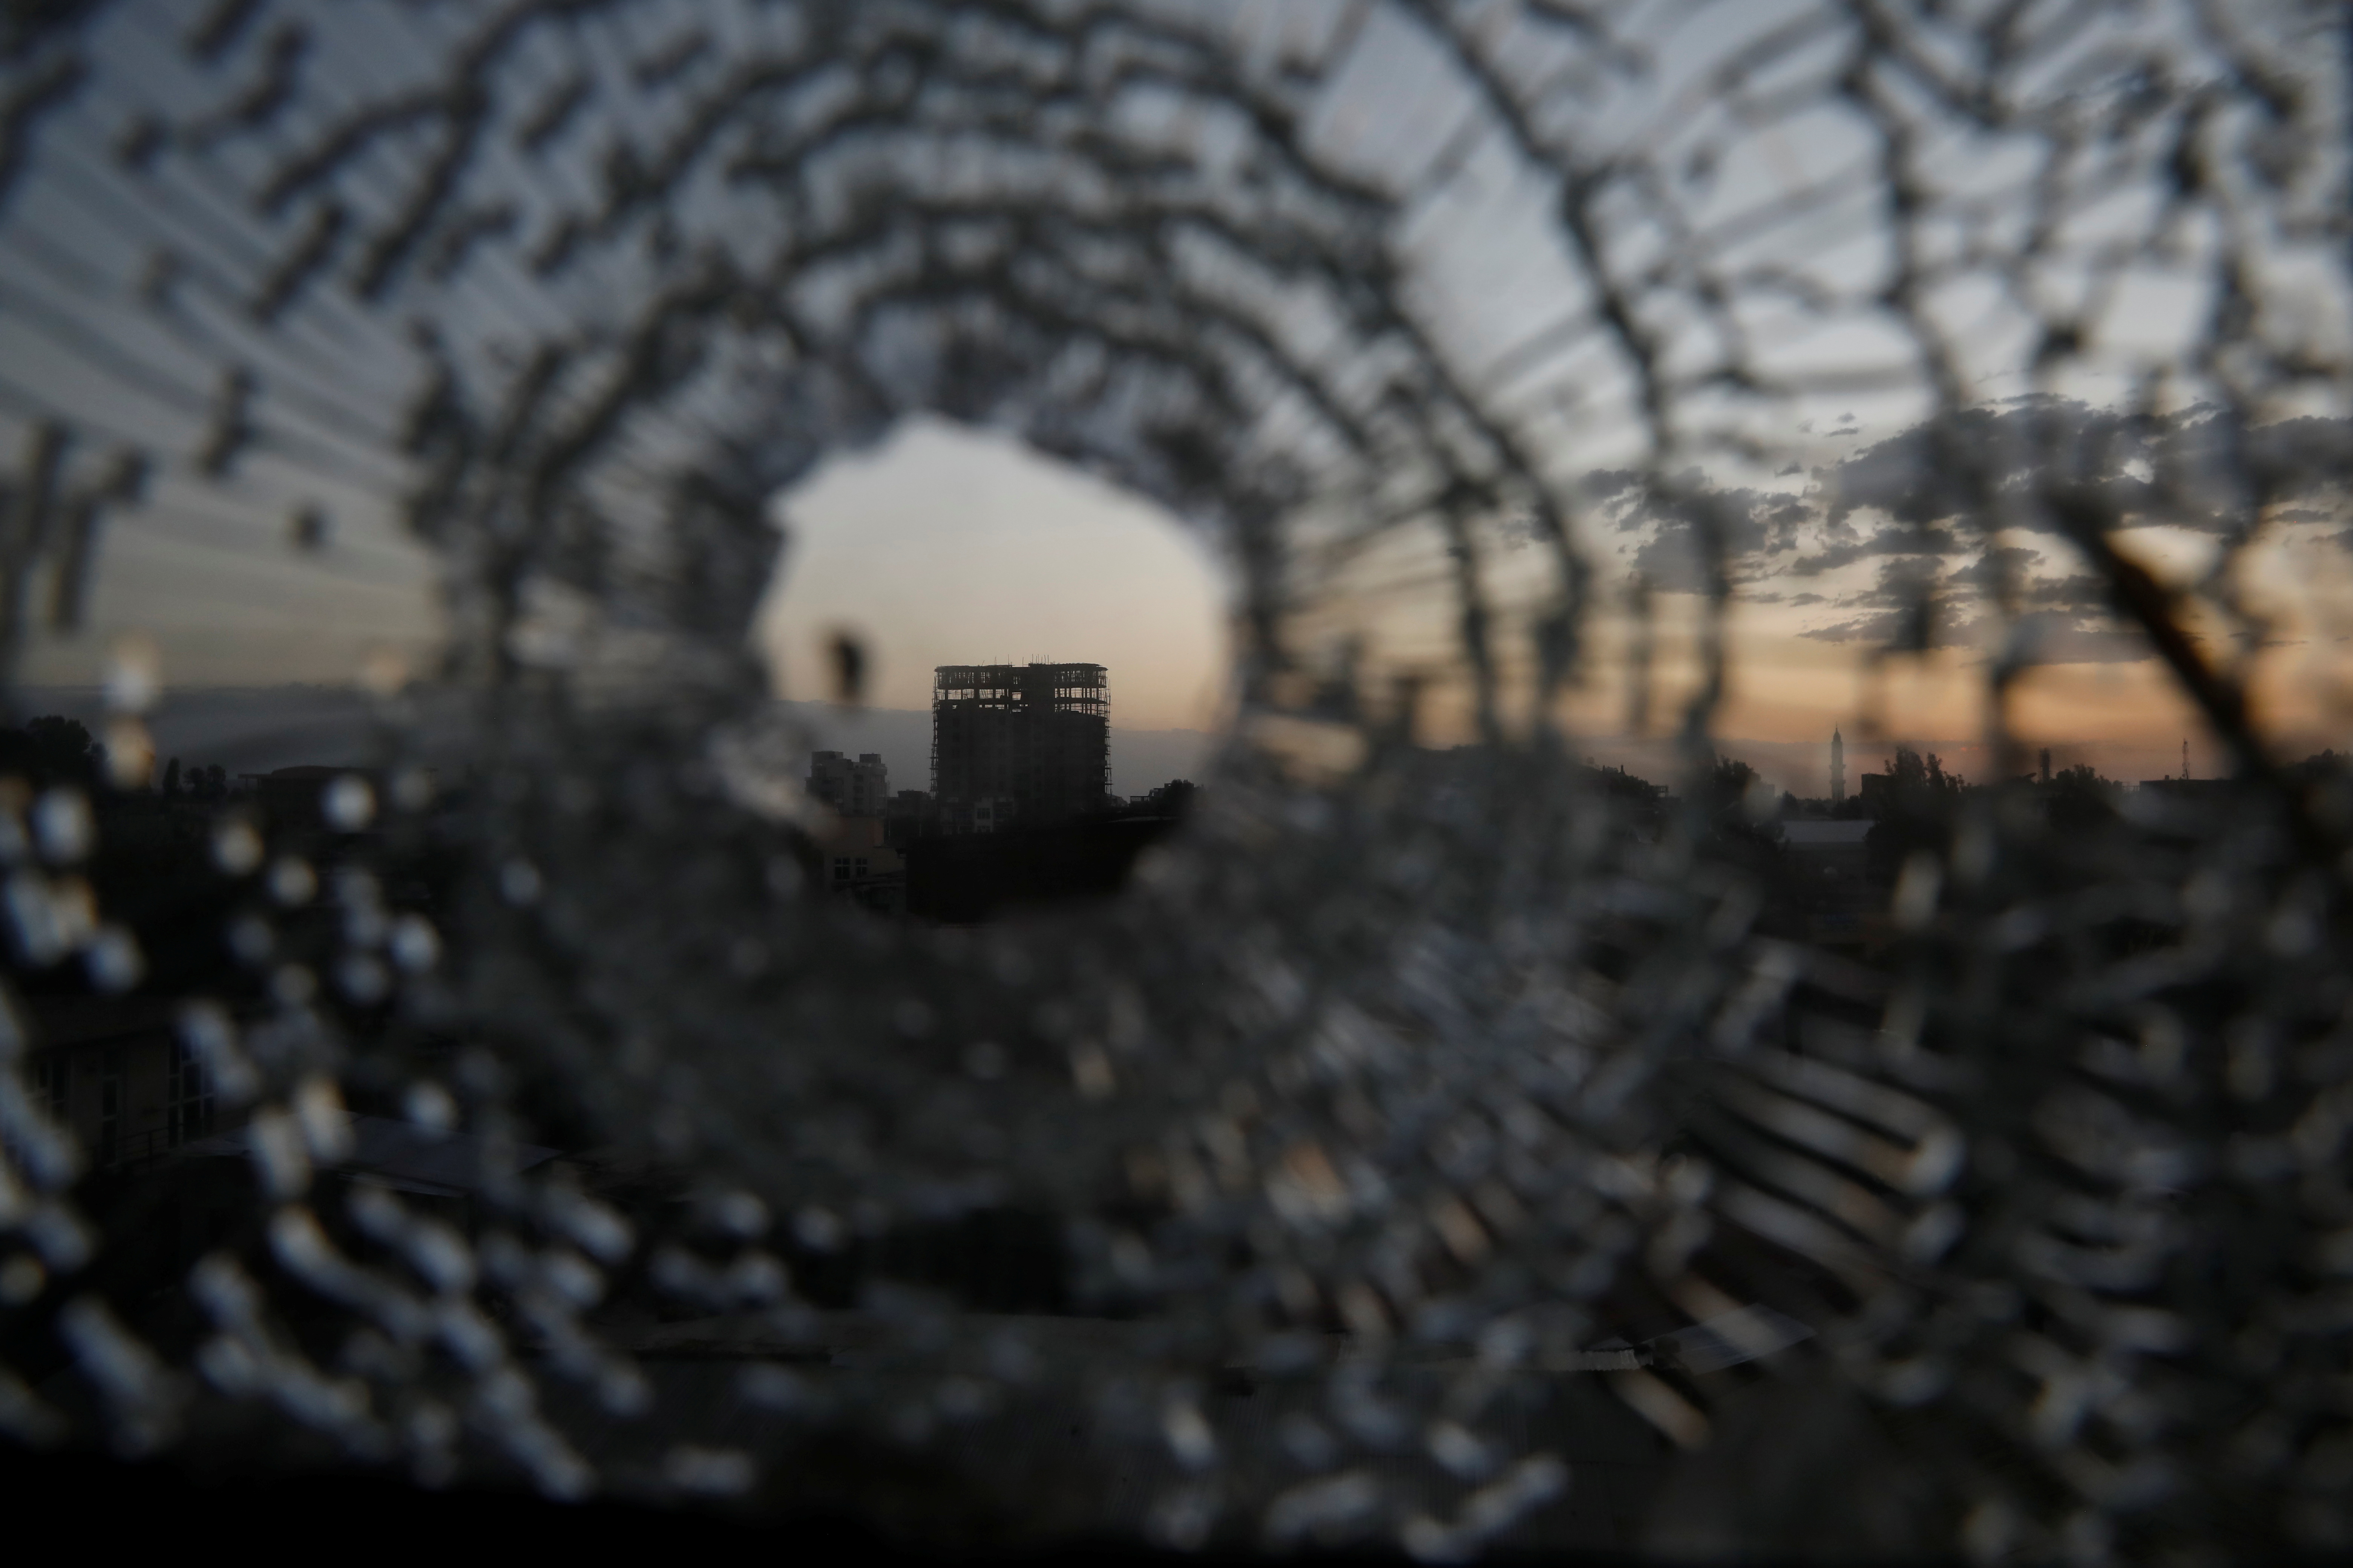 Building is seen through a bullet hole in a window of the Africa Hotel in the town of Shire, Tigray region